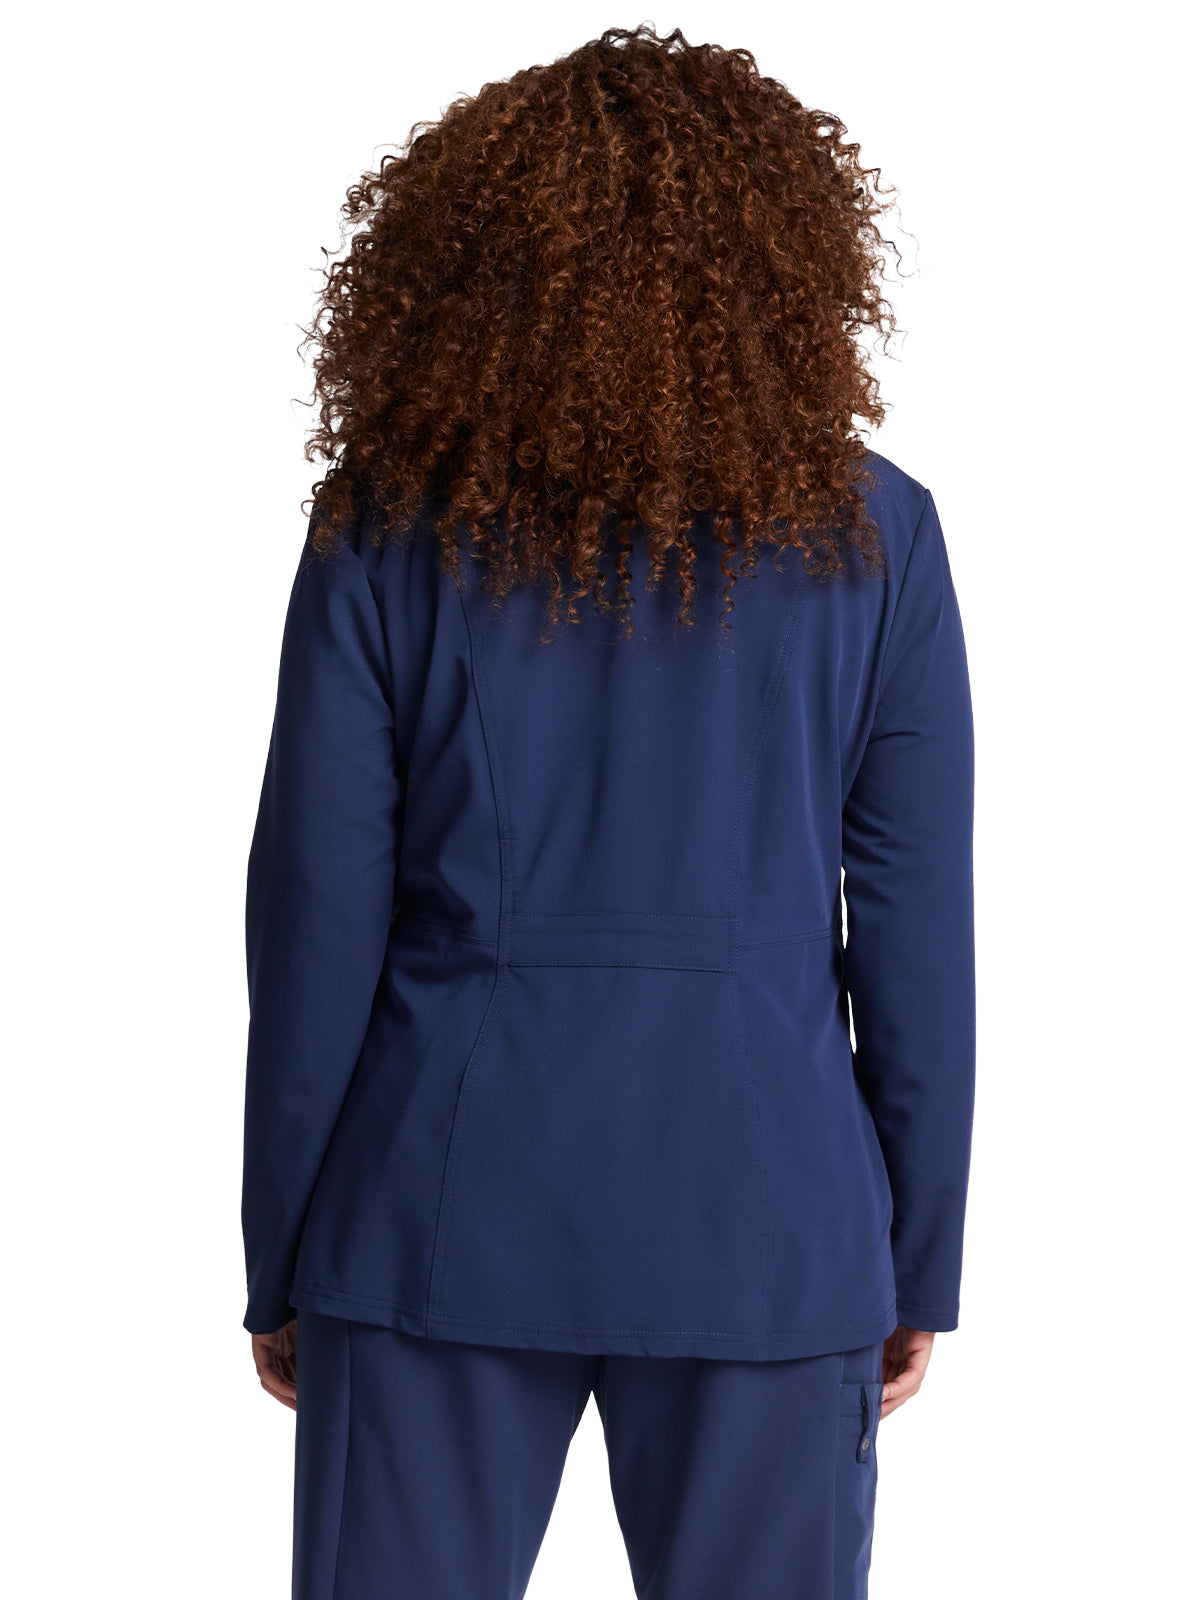 Women's Snap Front Warm-Up Jacket